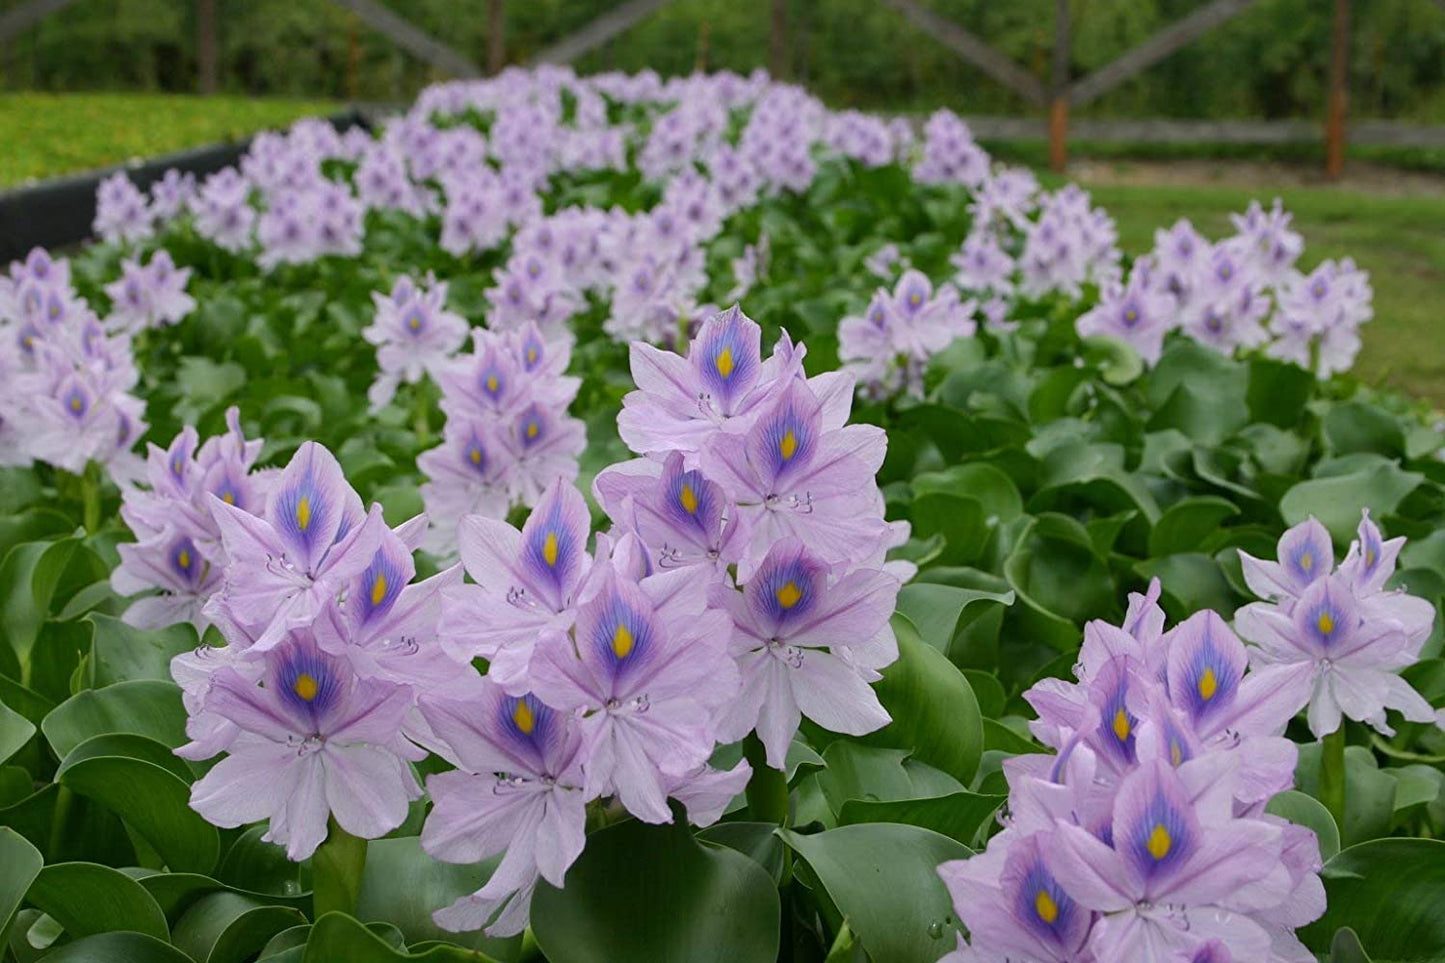 Floating Plants for Water Gardens and Ponds (Water Hyacinth)